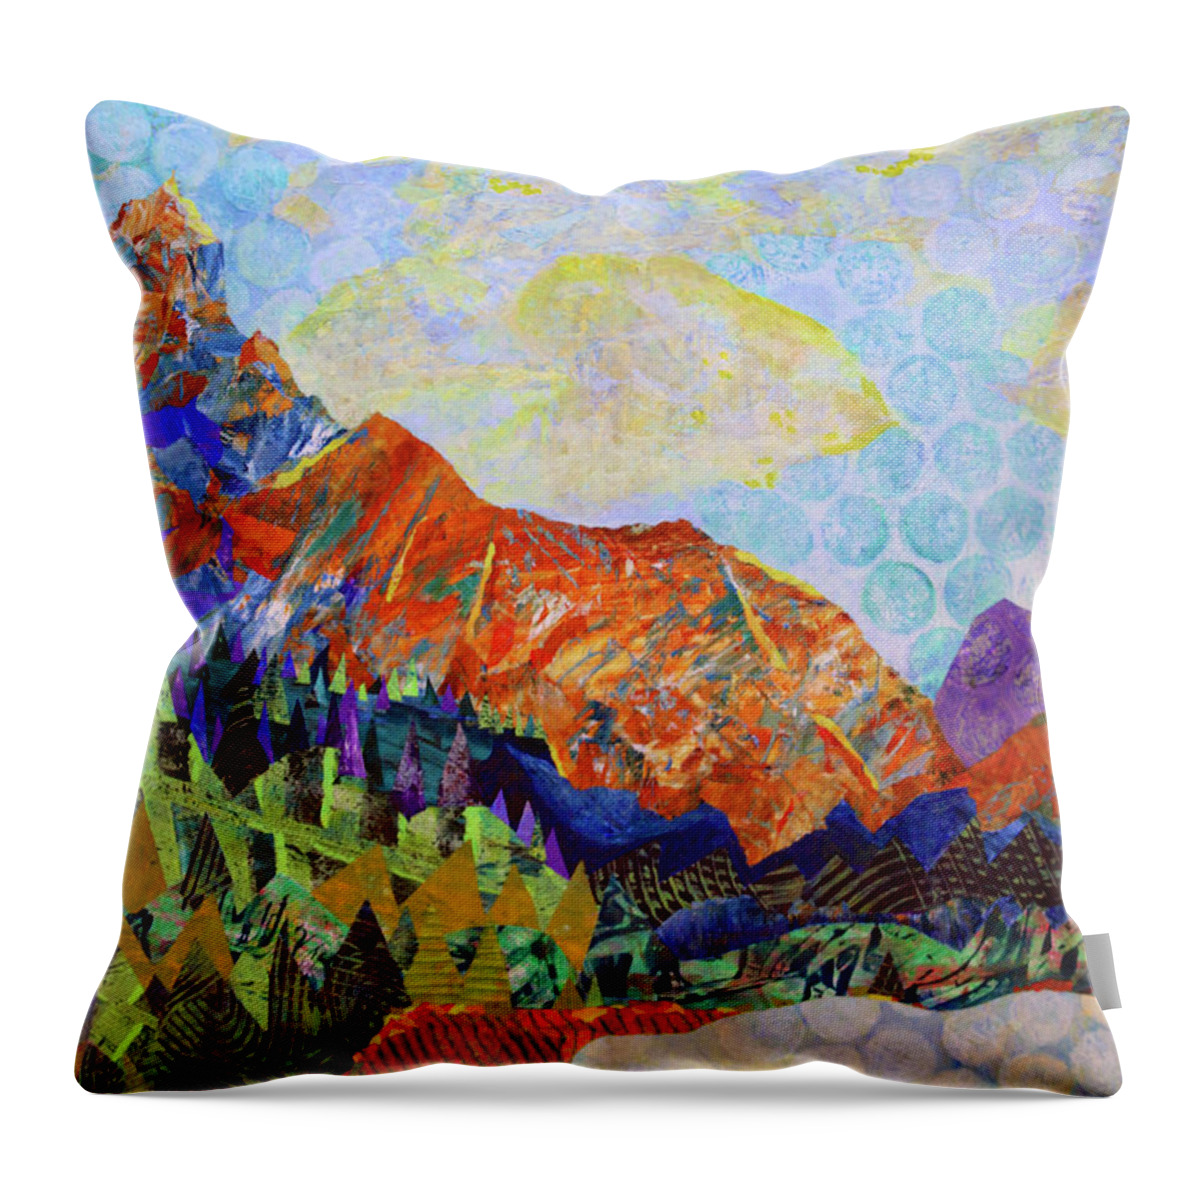 Monoprint Collage Throw Pillow featuring the painting The Golden Hour by Polly Castor